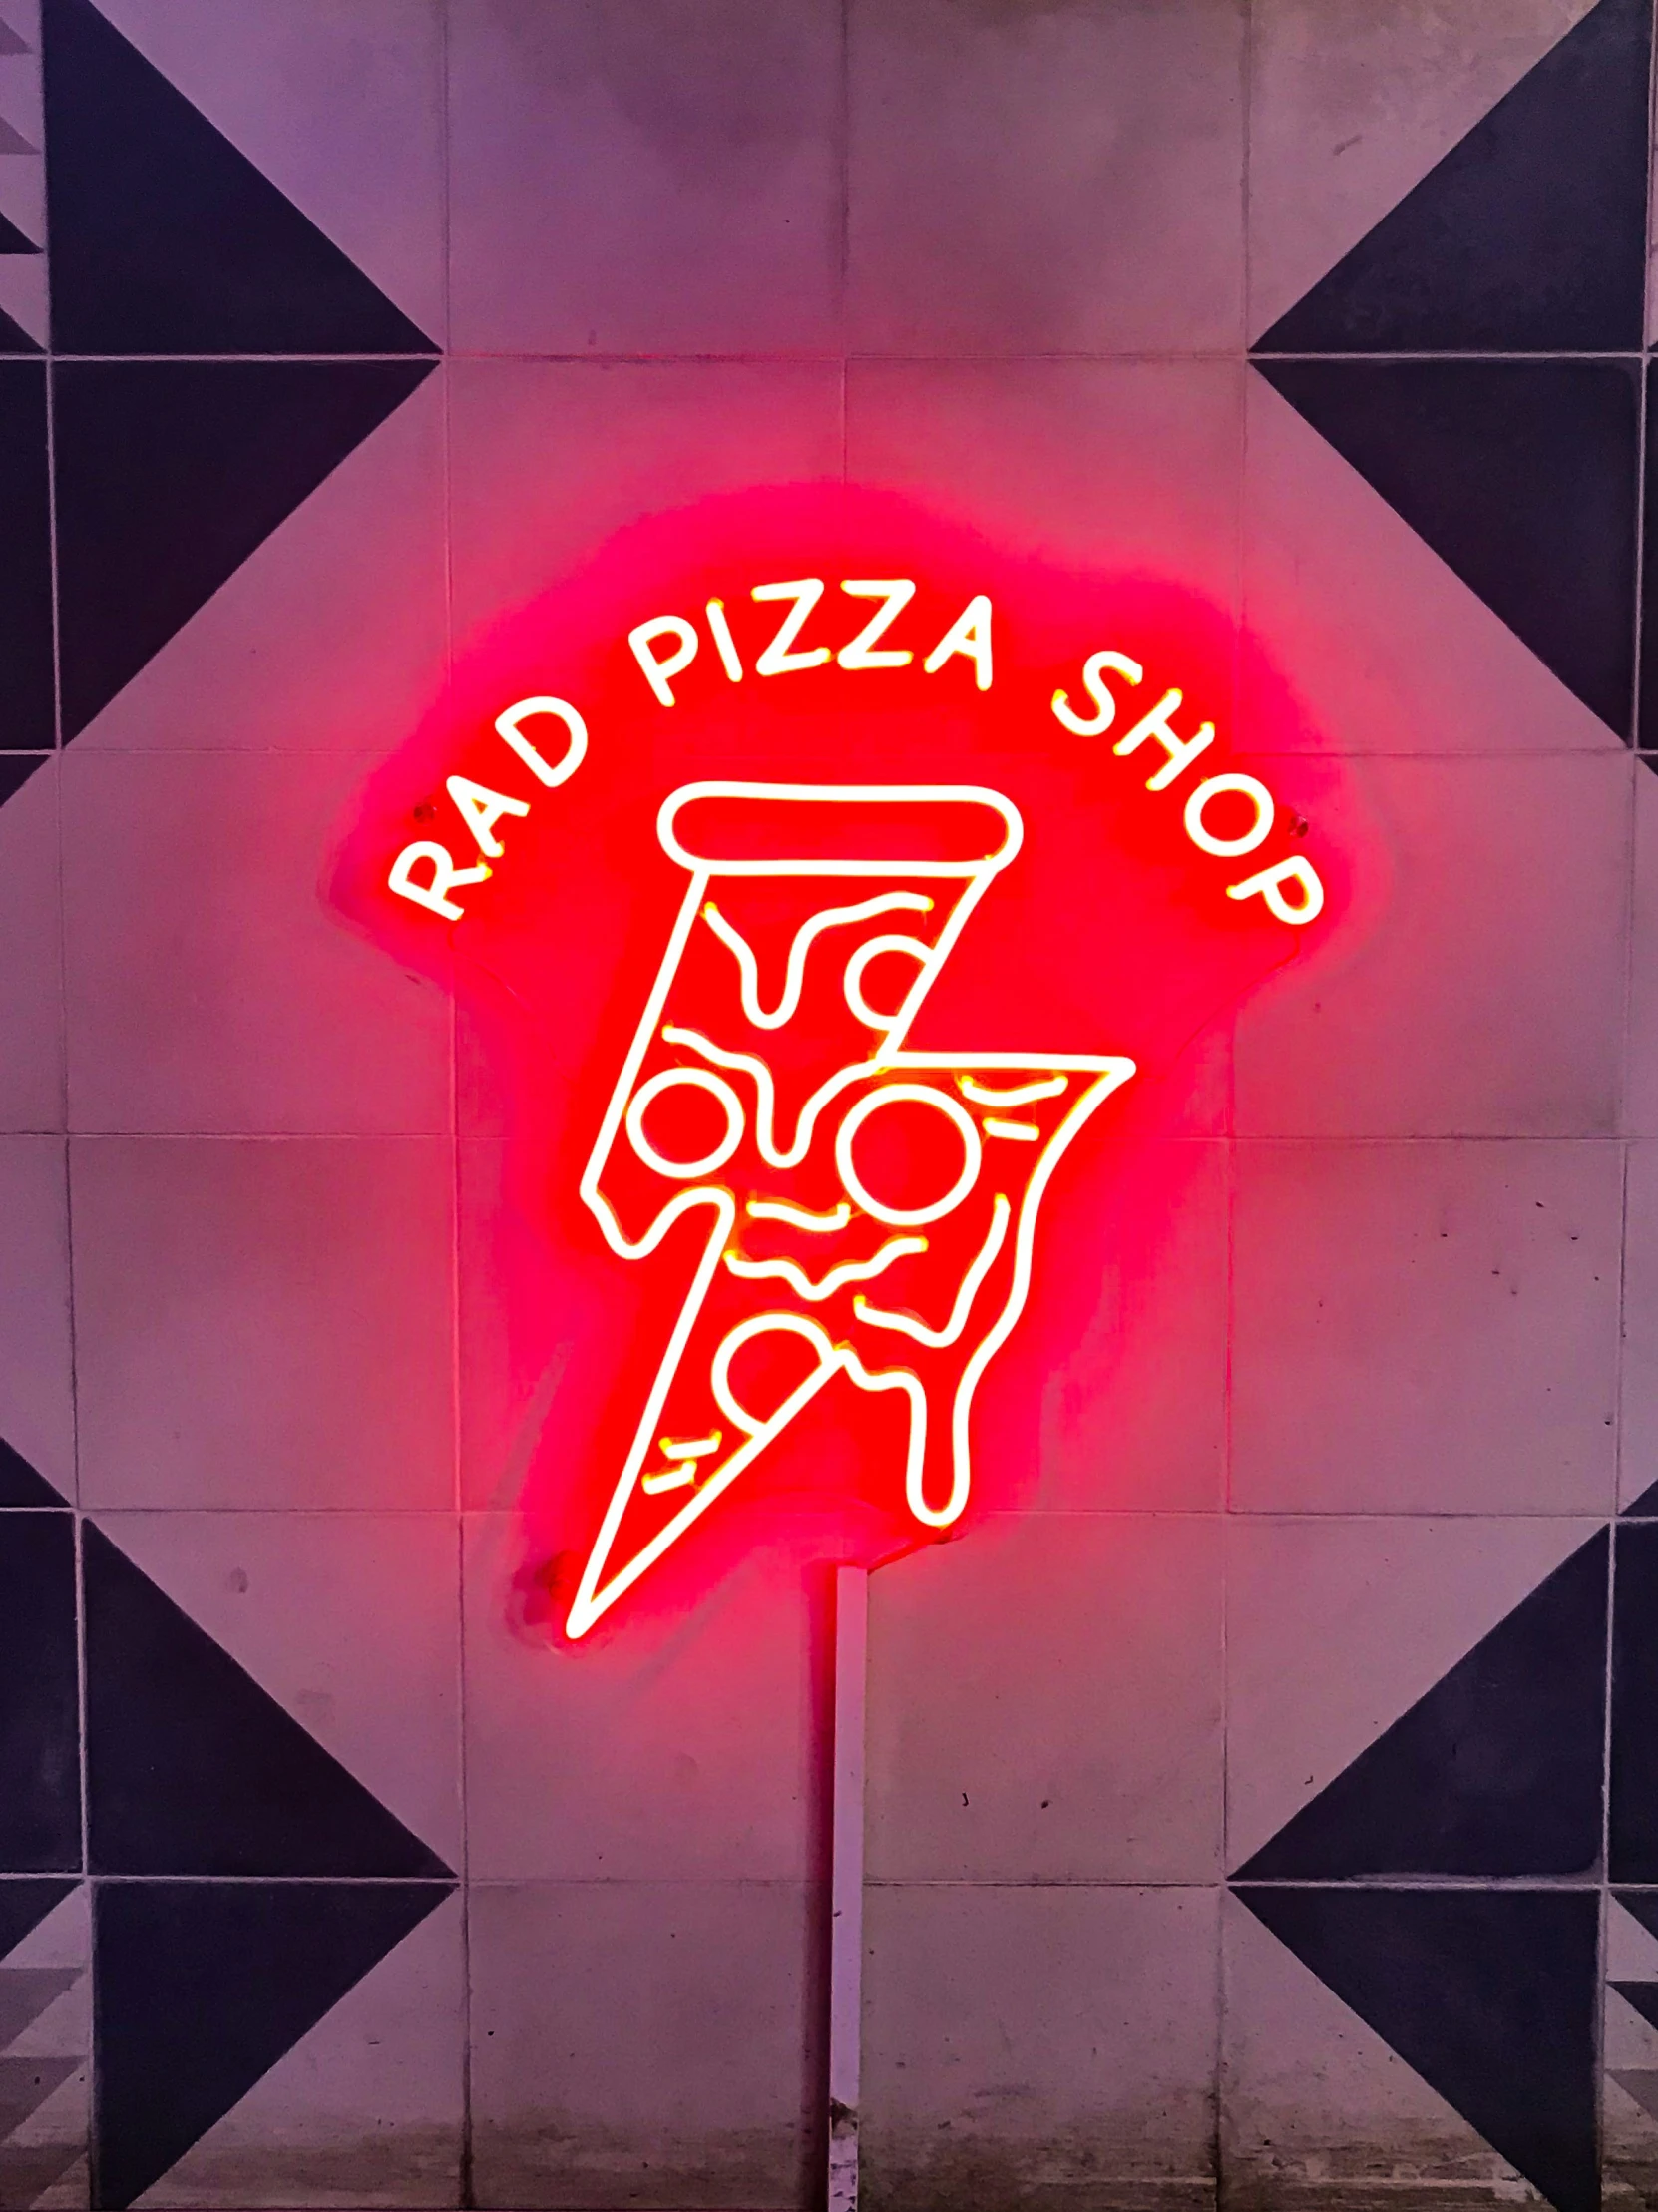 a sign in the shape of a pizza is displayed